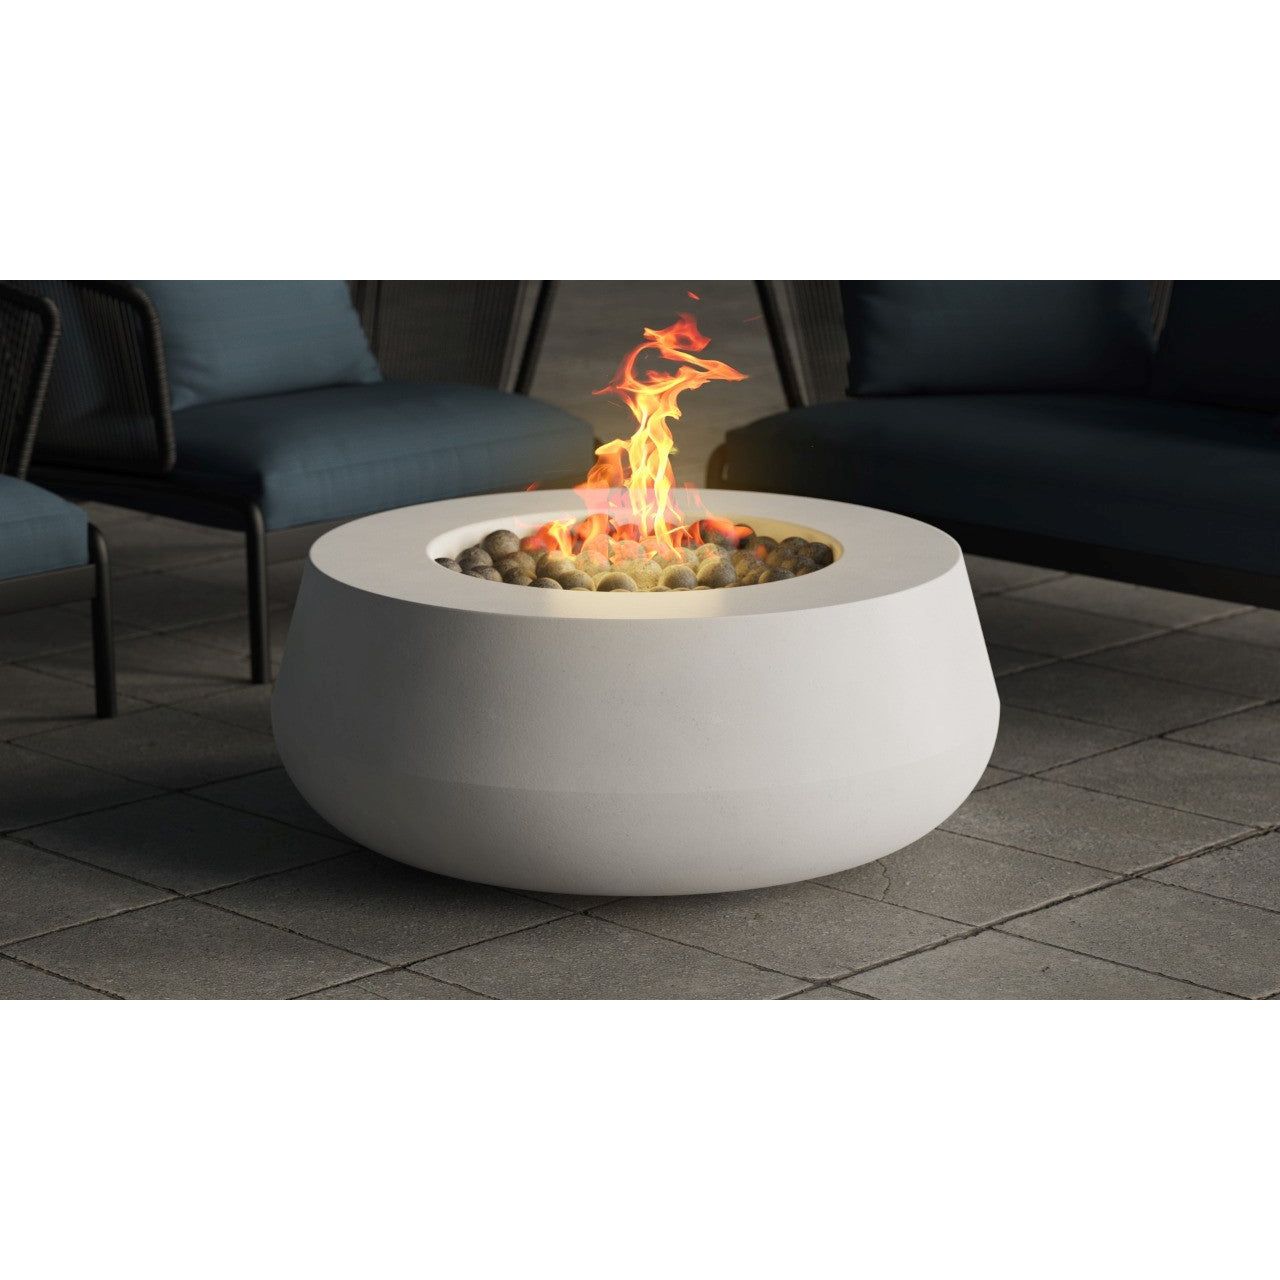 Oasis Fire Table by PH - Majestic Fountains and More..Oasis Fire Table in GFRC Concrete by Prism Hardscapes - Majestic Fountains